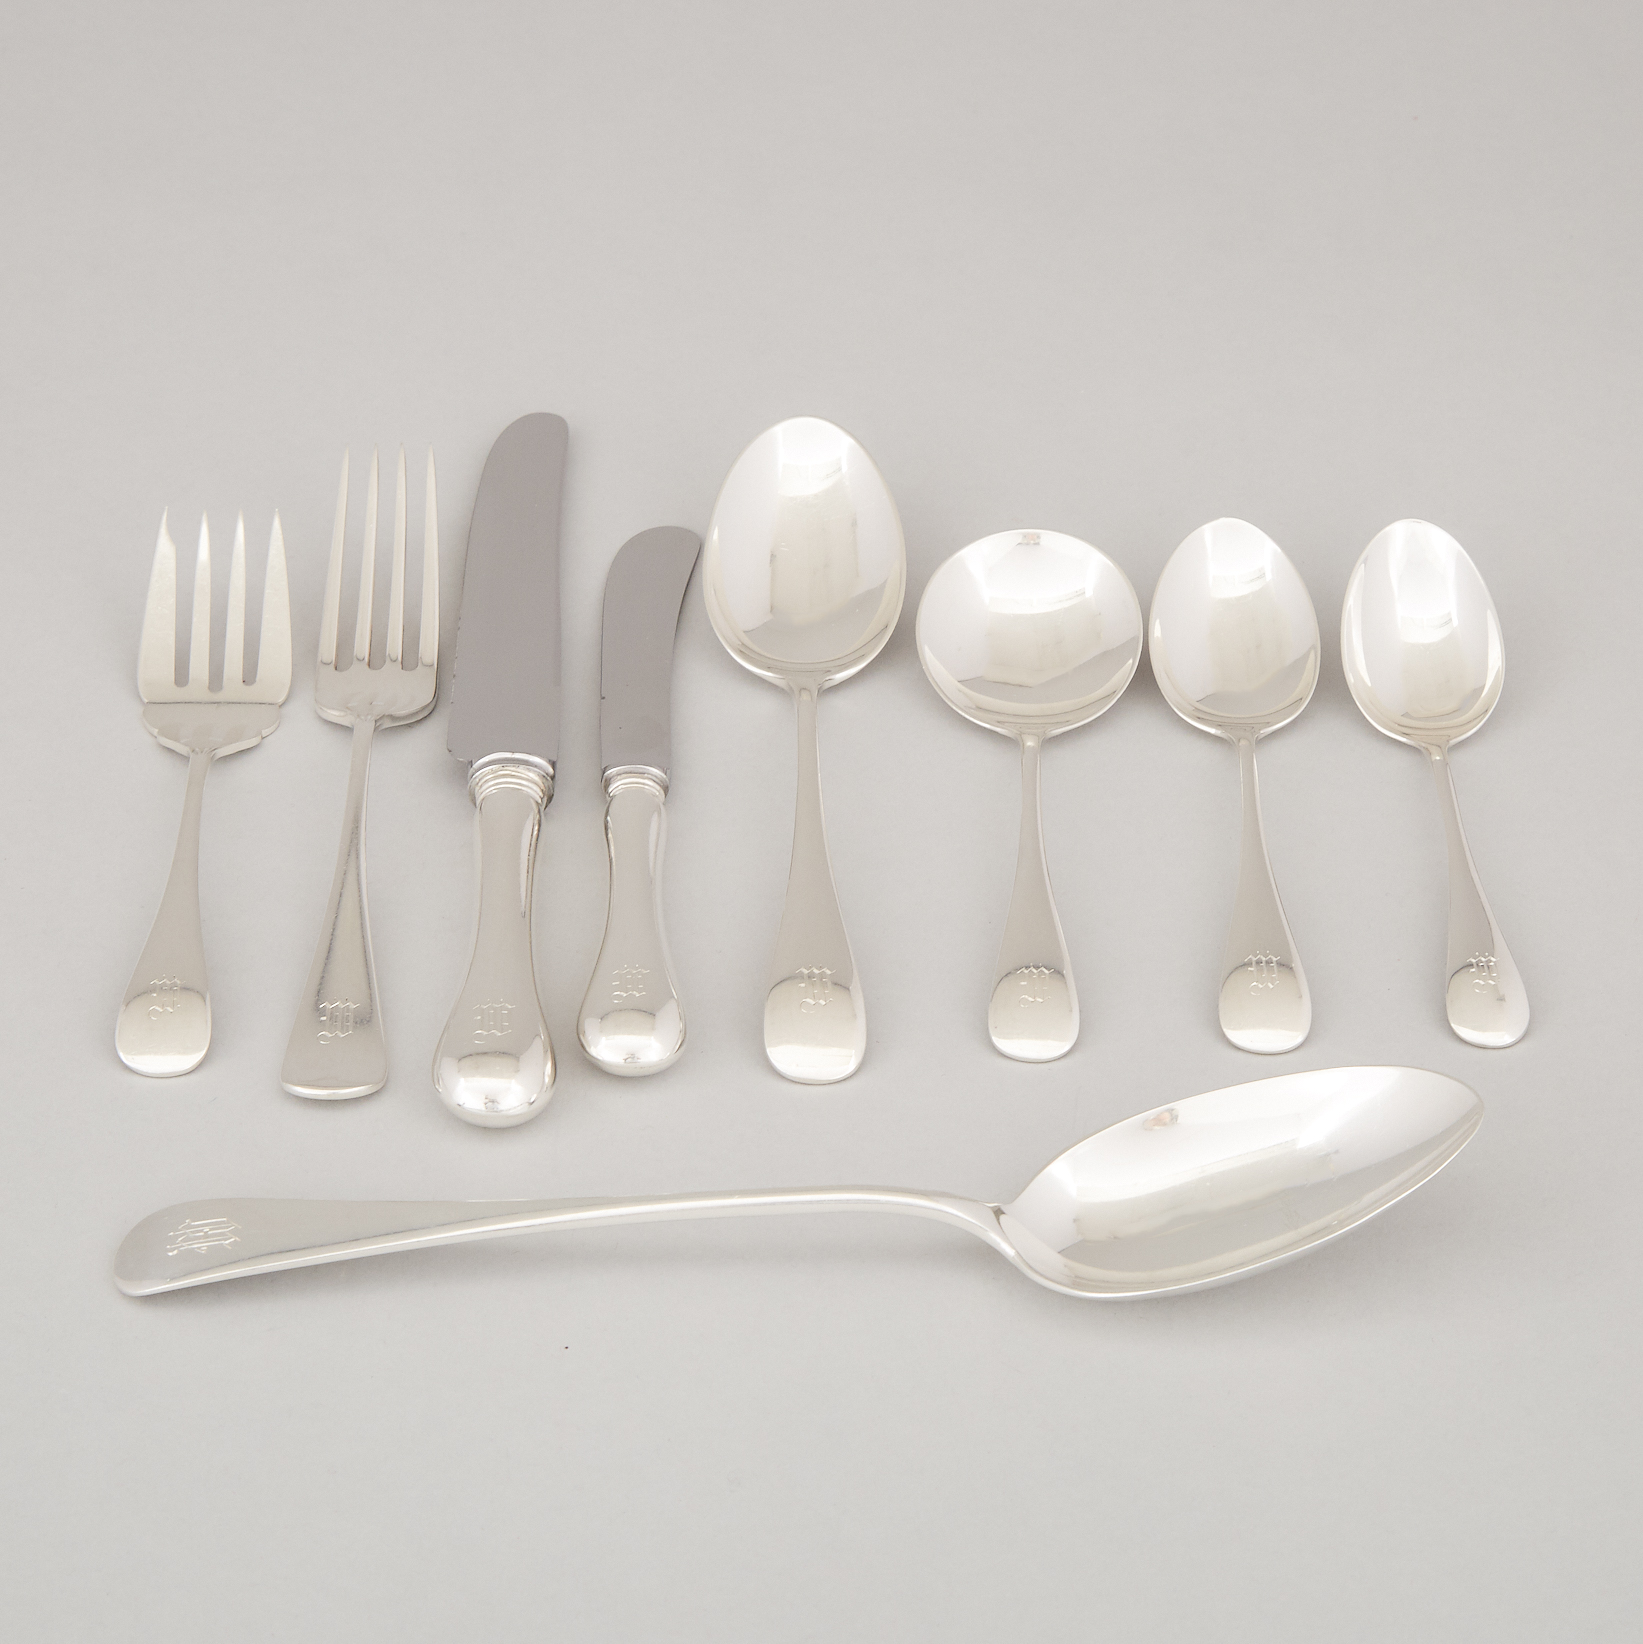 Mainly Canadian Silver 'Old English' Pattern Flatware Service, Henry Birks & Sons, Montreal, Que., 20th century